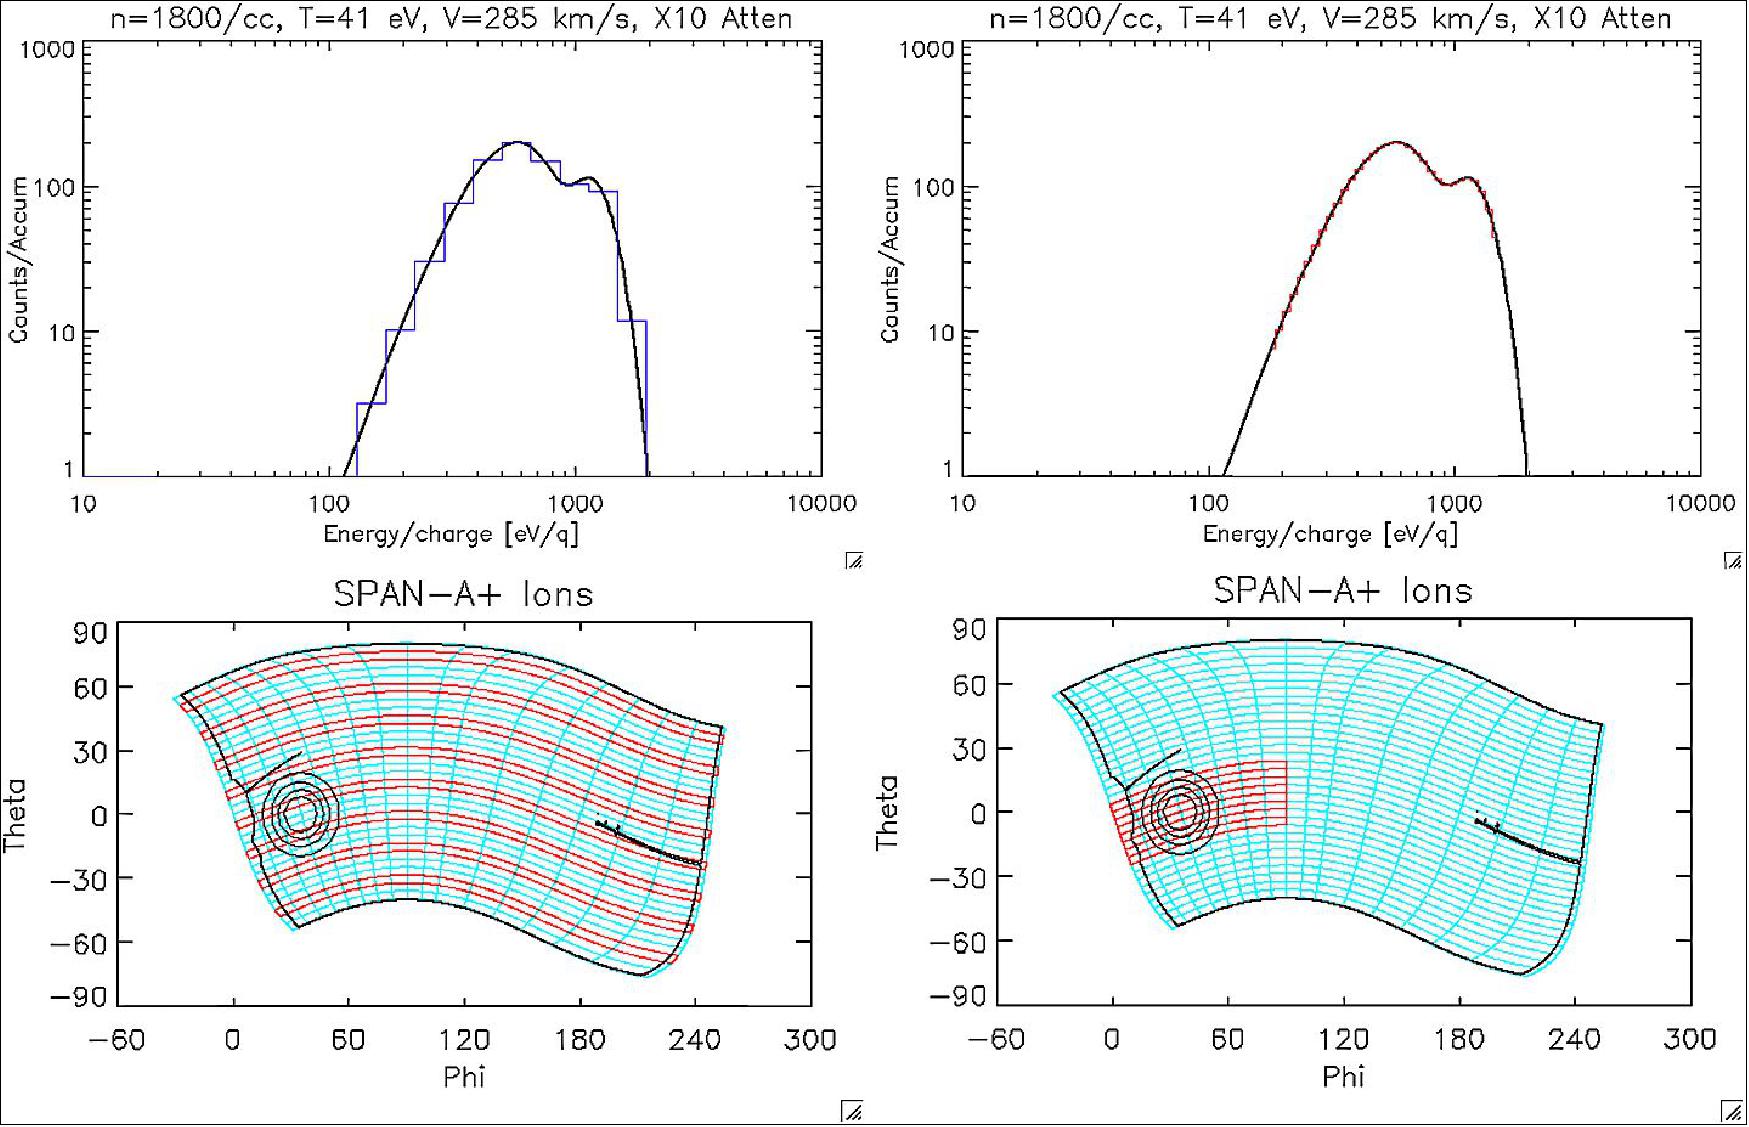 Figure 79: Proton energy spectra and angular distributions demonstrating the expected measurement resolution for coarse (left) and targeted (right) sweeps, for a two-component solar wind proton distribution at closest approach (image credit: SWEAP collaboration)